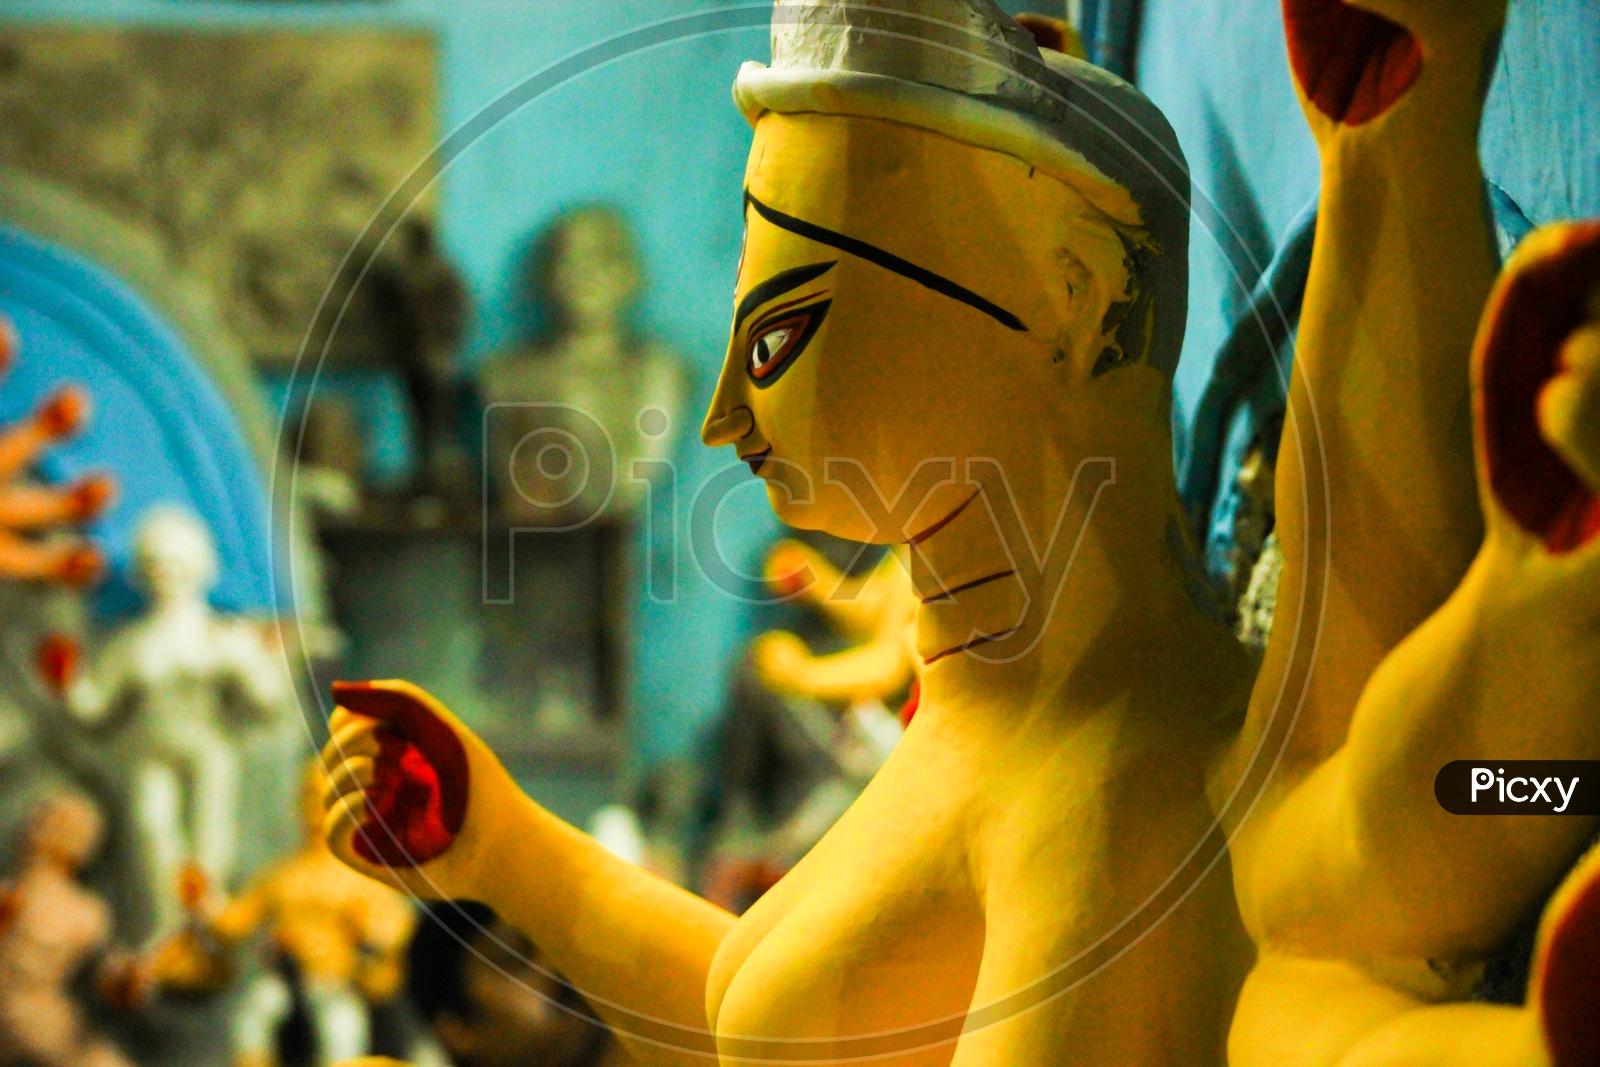 Kumartuli,West Bengal, India, July 2018. A Clay Idol Of Goddess Durga Under Construction At A Shop. Durga Puja Is The Most Awaited Hindu Festival In Eastern India And Worldwide.